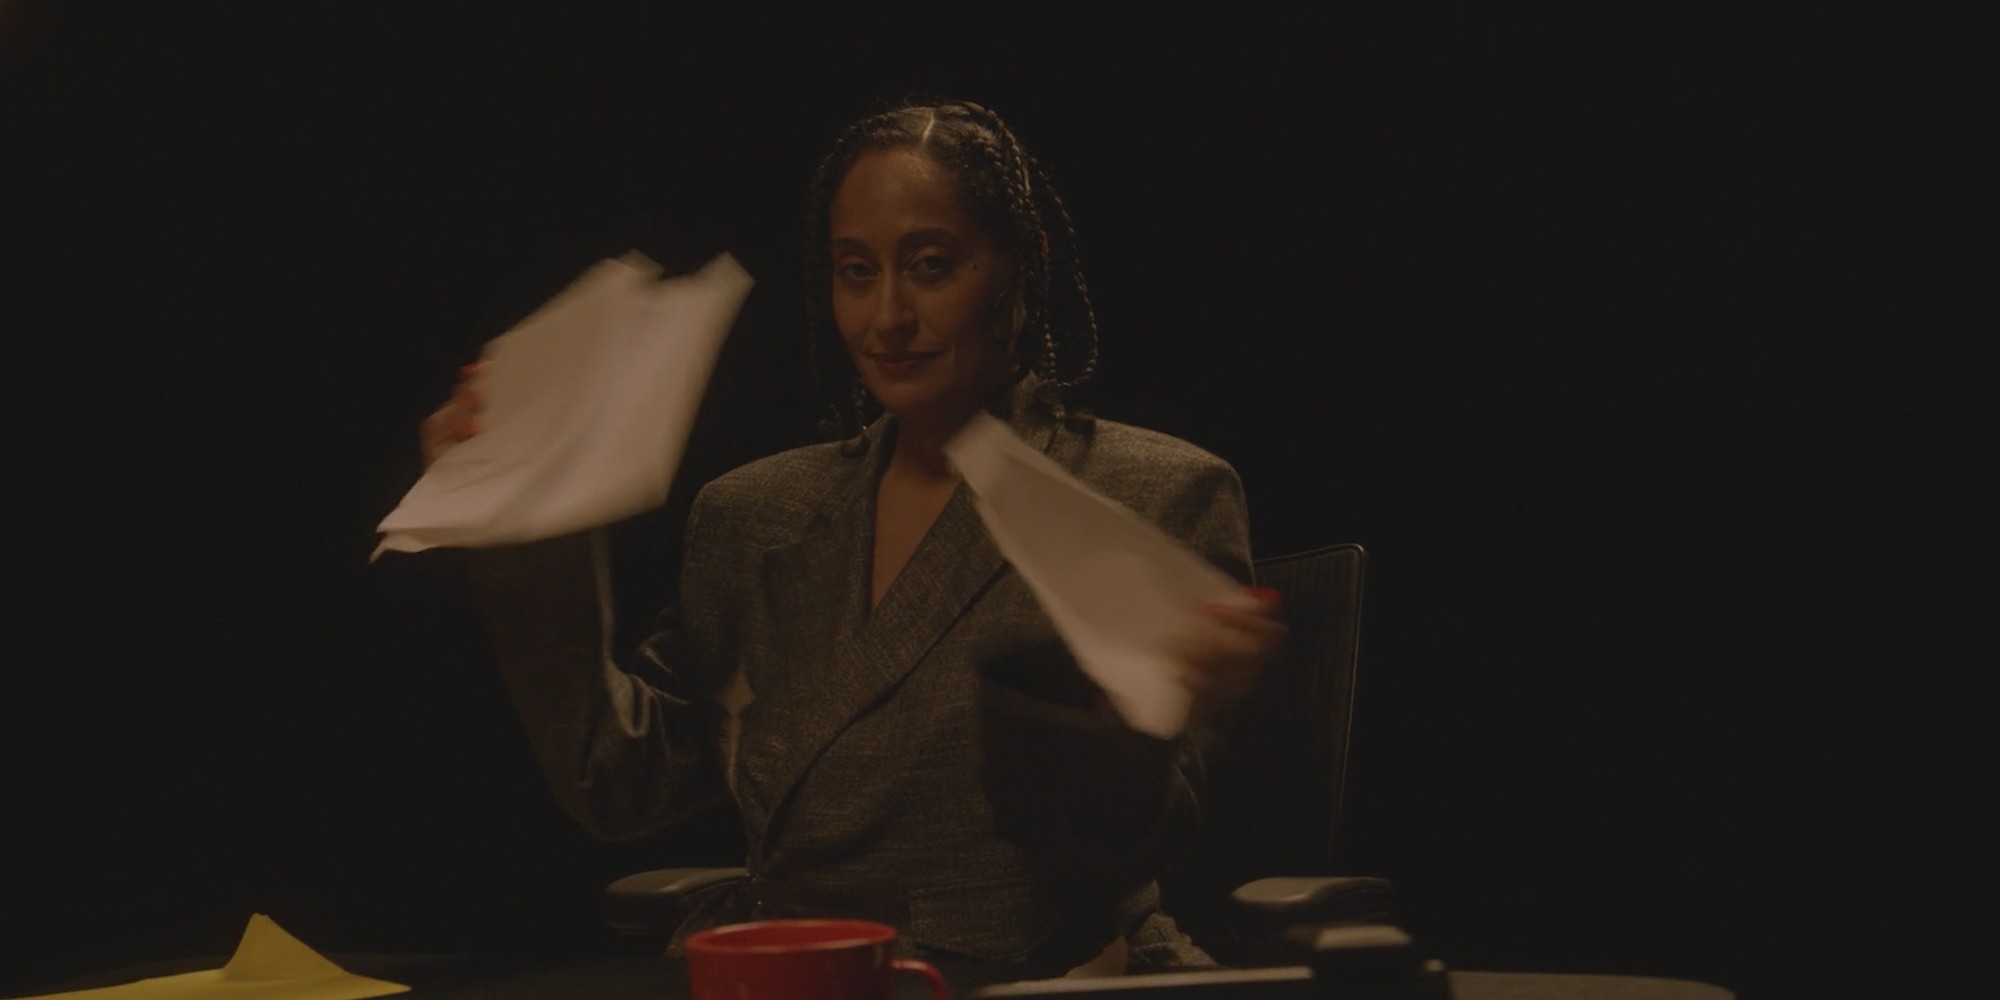 PYER MOSS 'ALWAYS SOLD OUT' CAMPAIGN FILM STARRING TRACEE ELLIS ROSS